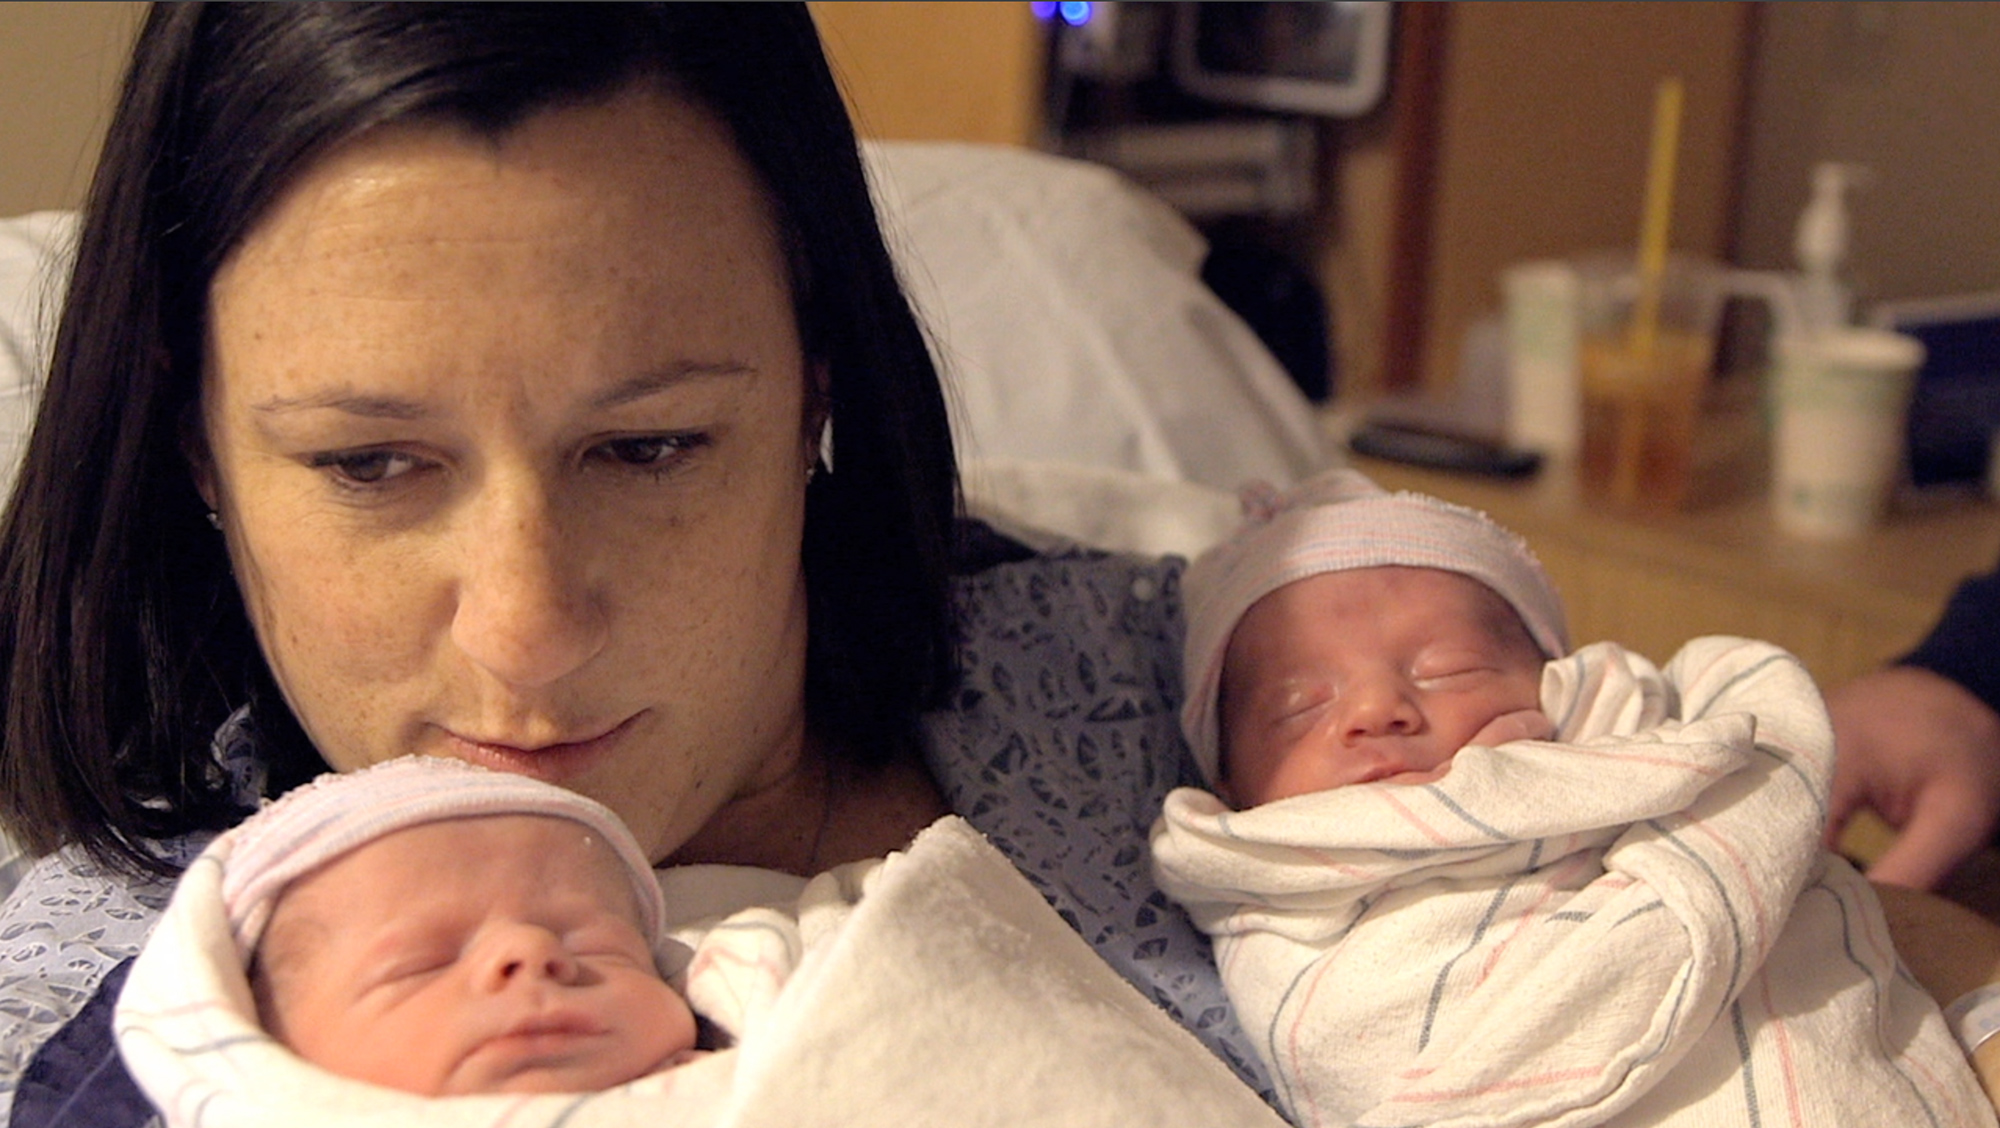 Award-winning documentarian Patrick Creadon (not in image) captures Lauren Sweeney from Boston, MA holding her twin boys for the first time for the short film Wishes for Baby from Fisher-Price, Inc.